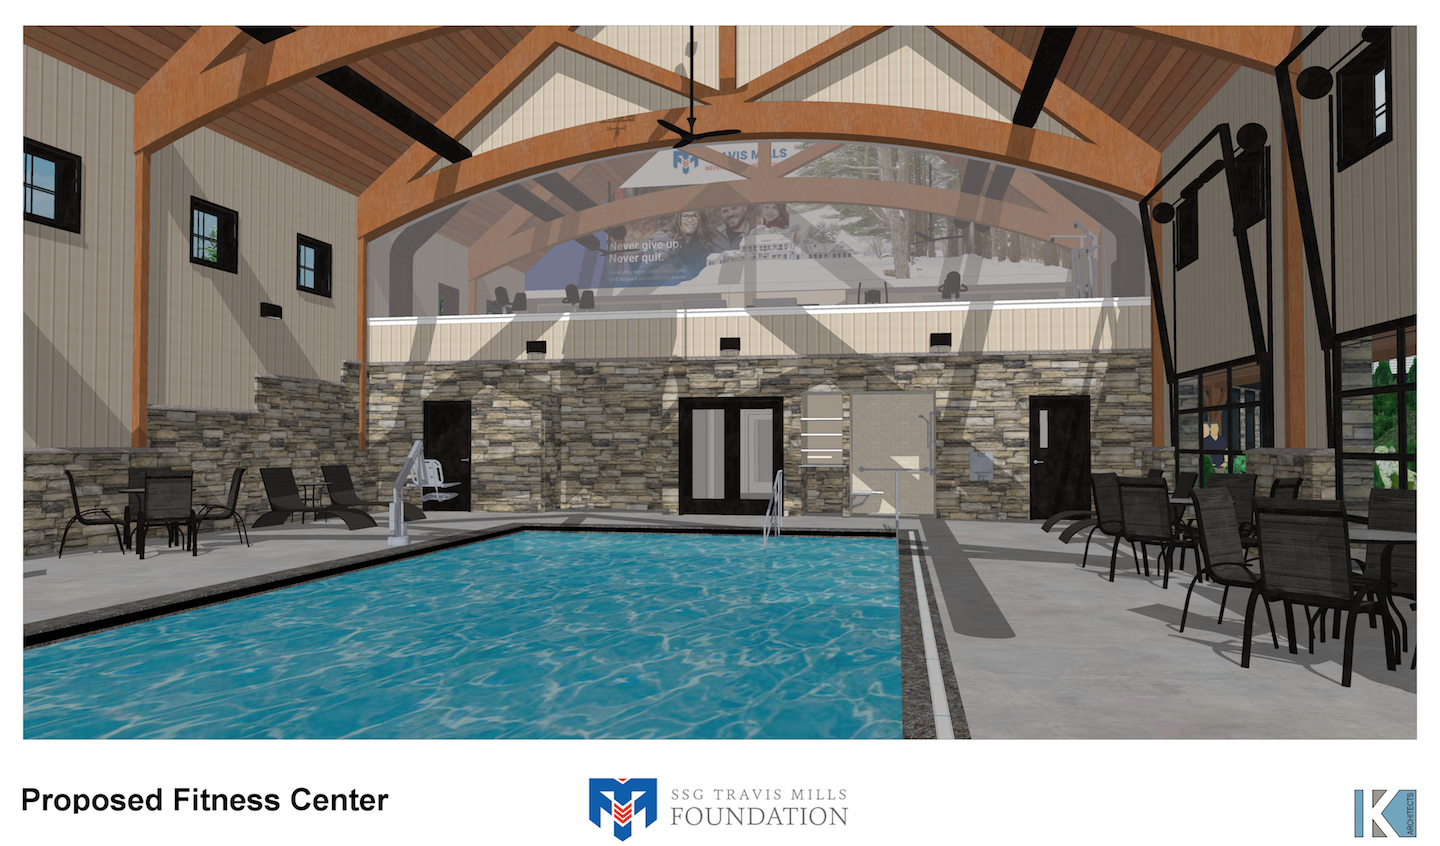 A rendering of the swimming pool, part of the planned Health & Wellness Center at the Travis Mills Retreat